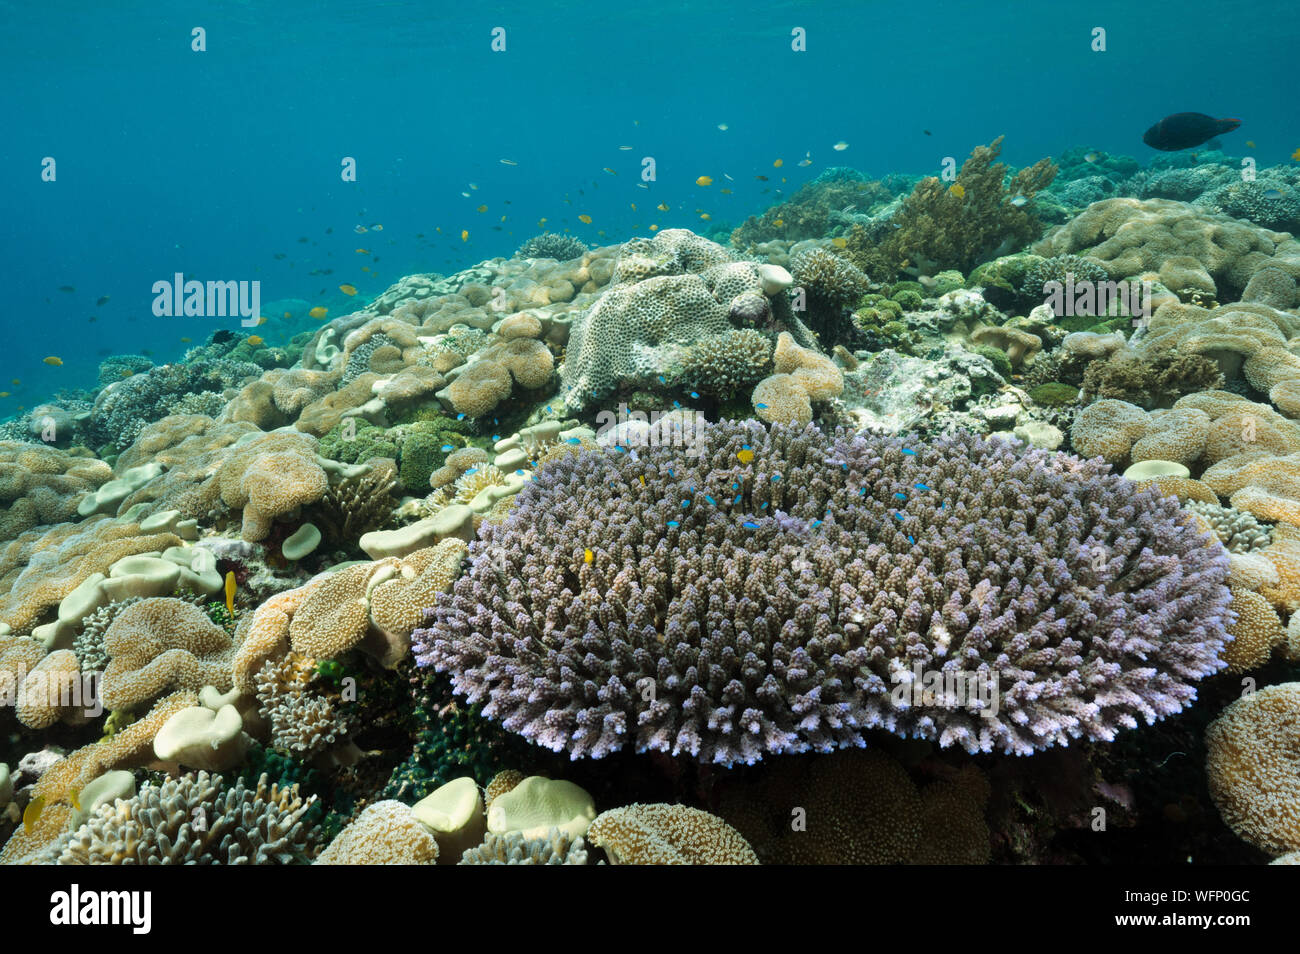 Reef scenic with soft corals, Sarcophyton crassocaule, and acropora table coral, Raja Ampat Indonesia. Stock Photo